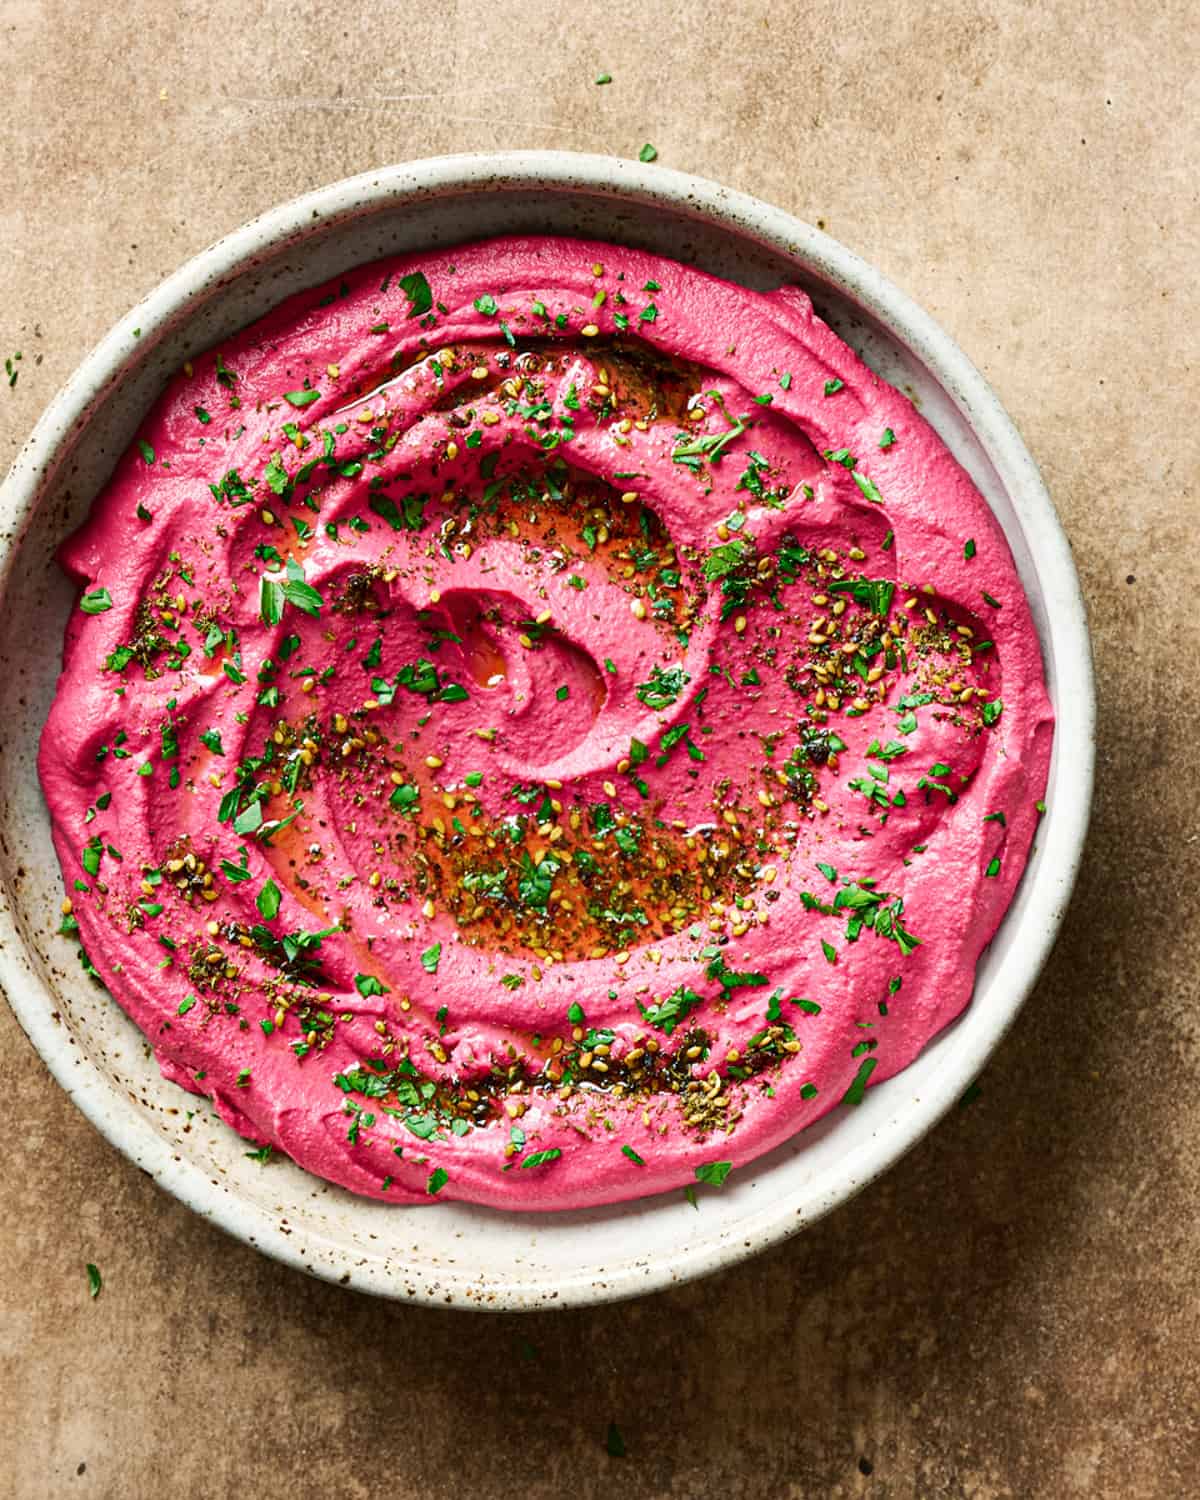 Large shallow bowl of beet hummus with parsley and oil on a table.